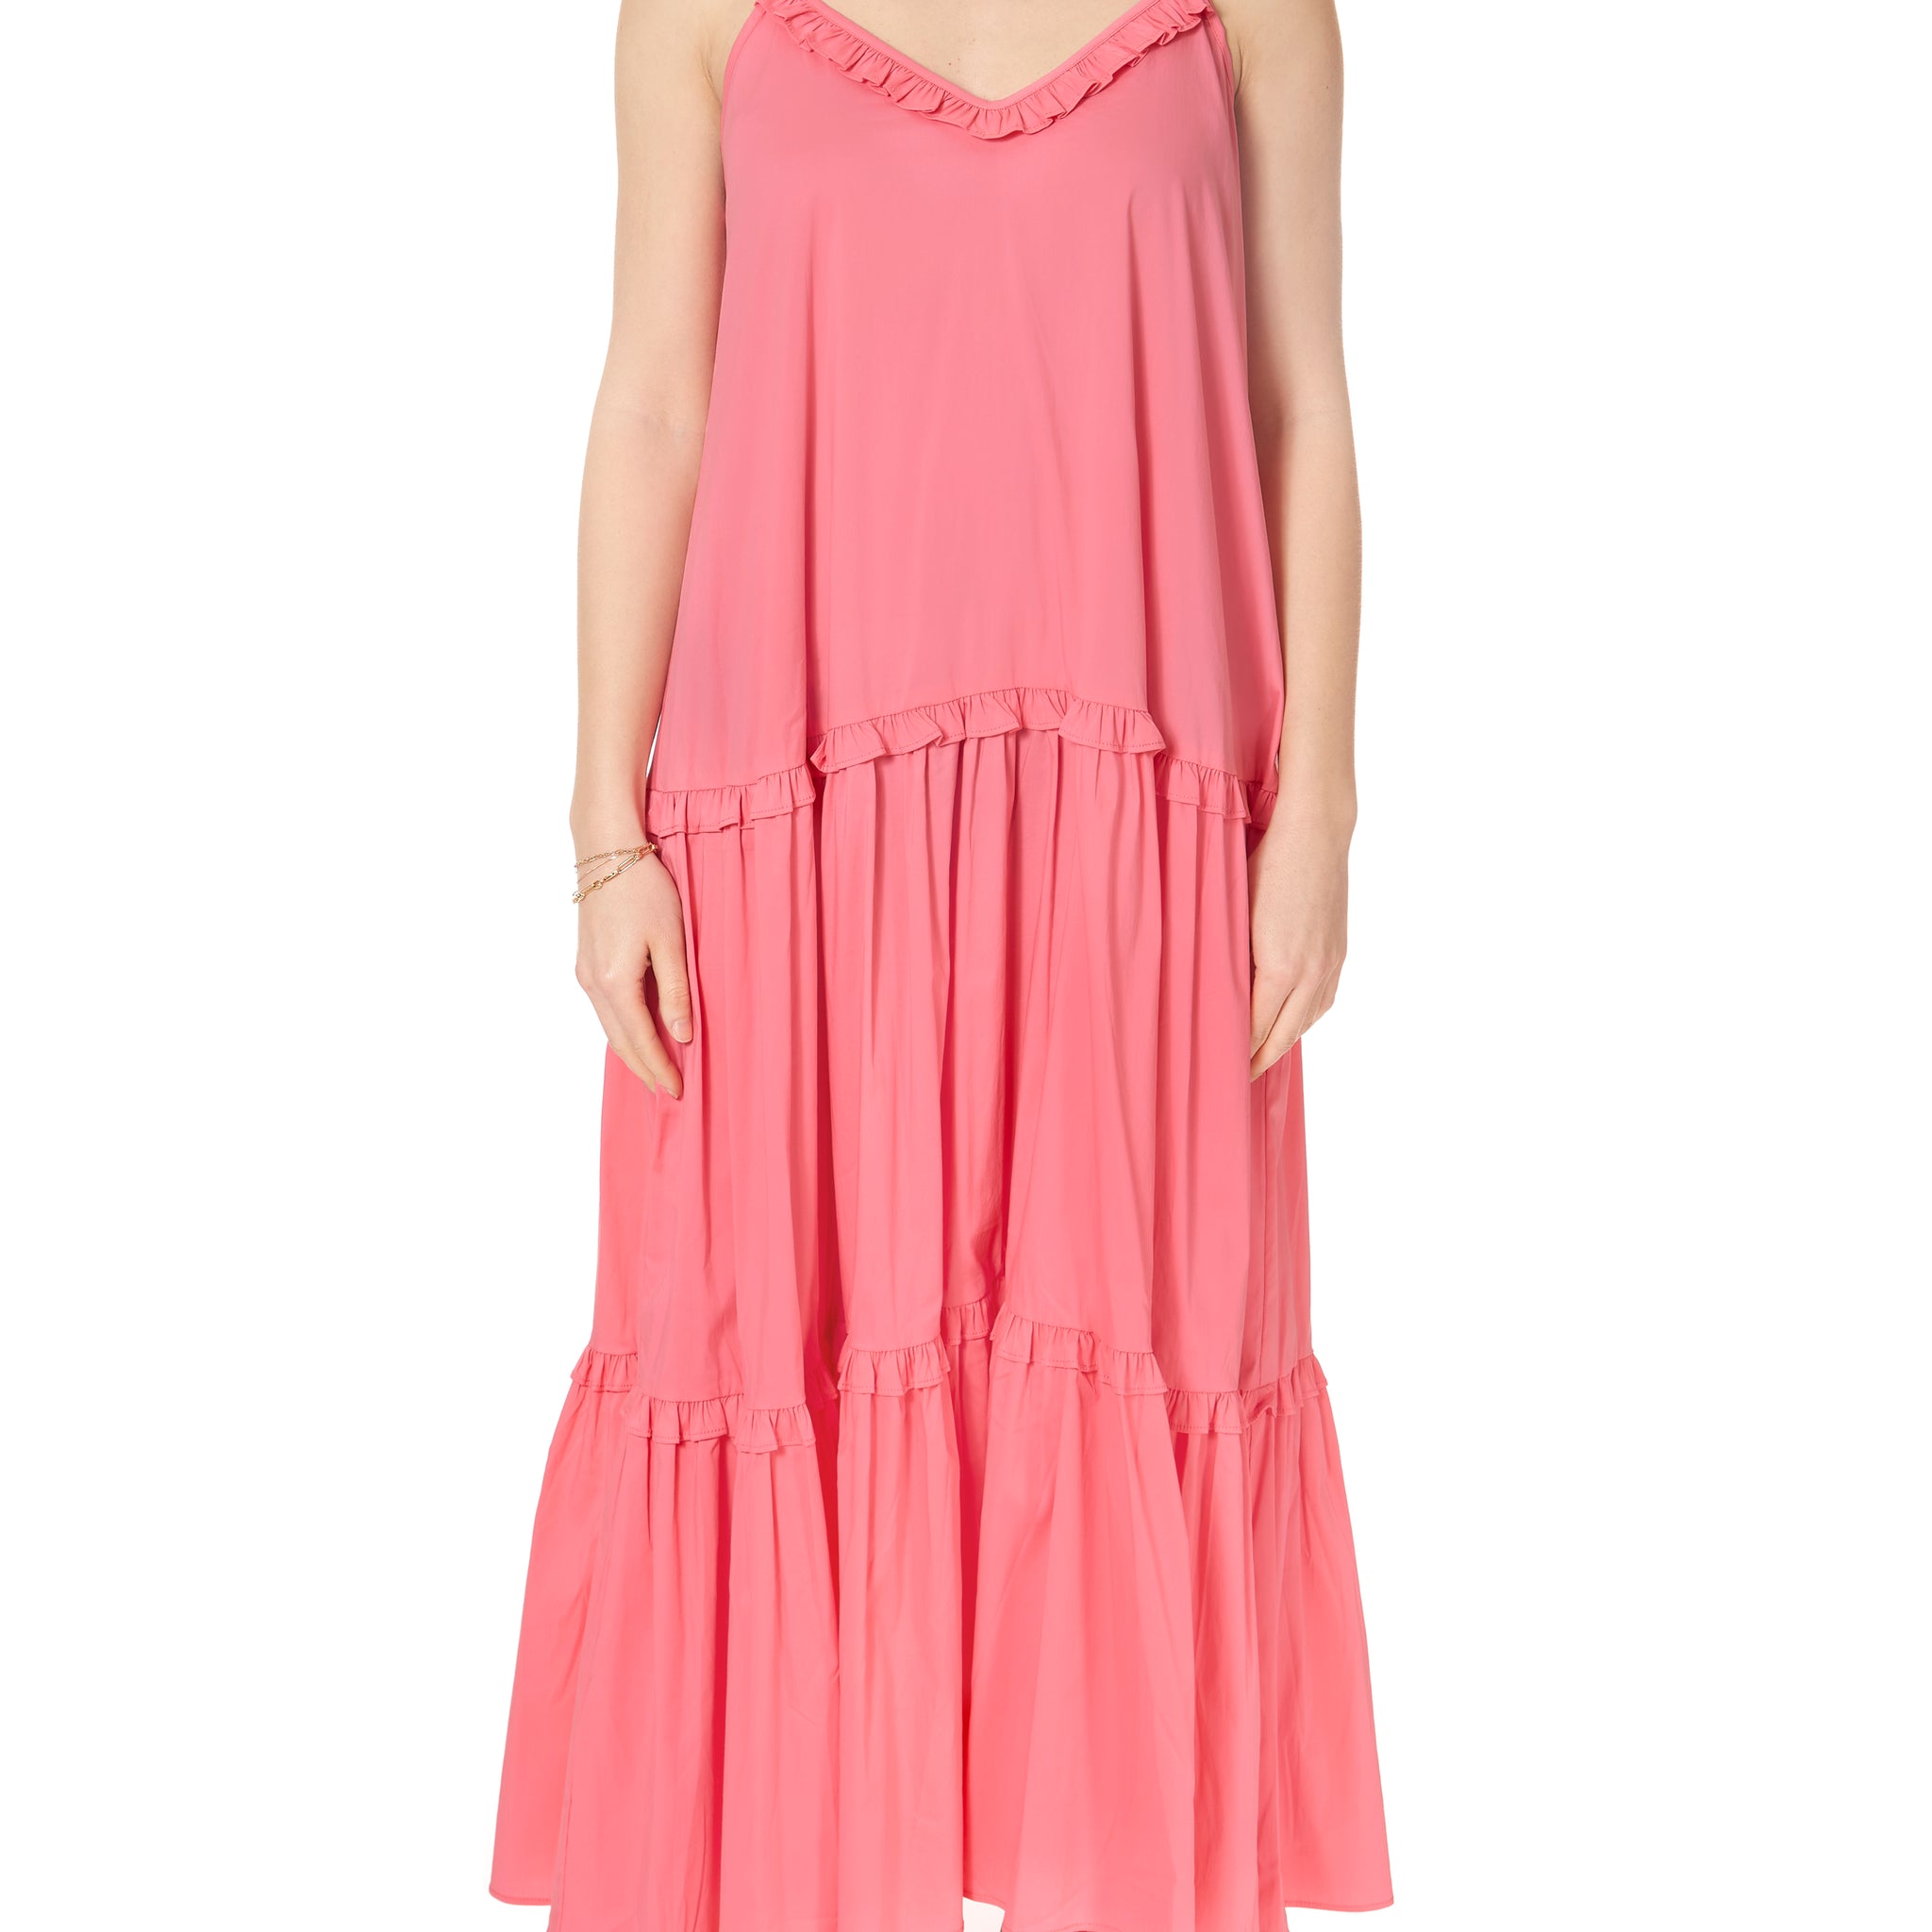 Red Lyrio Pink Strappy Ruffle Long Dress